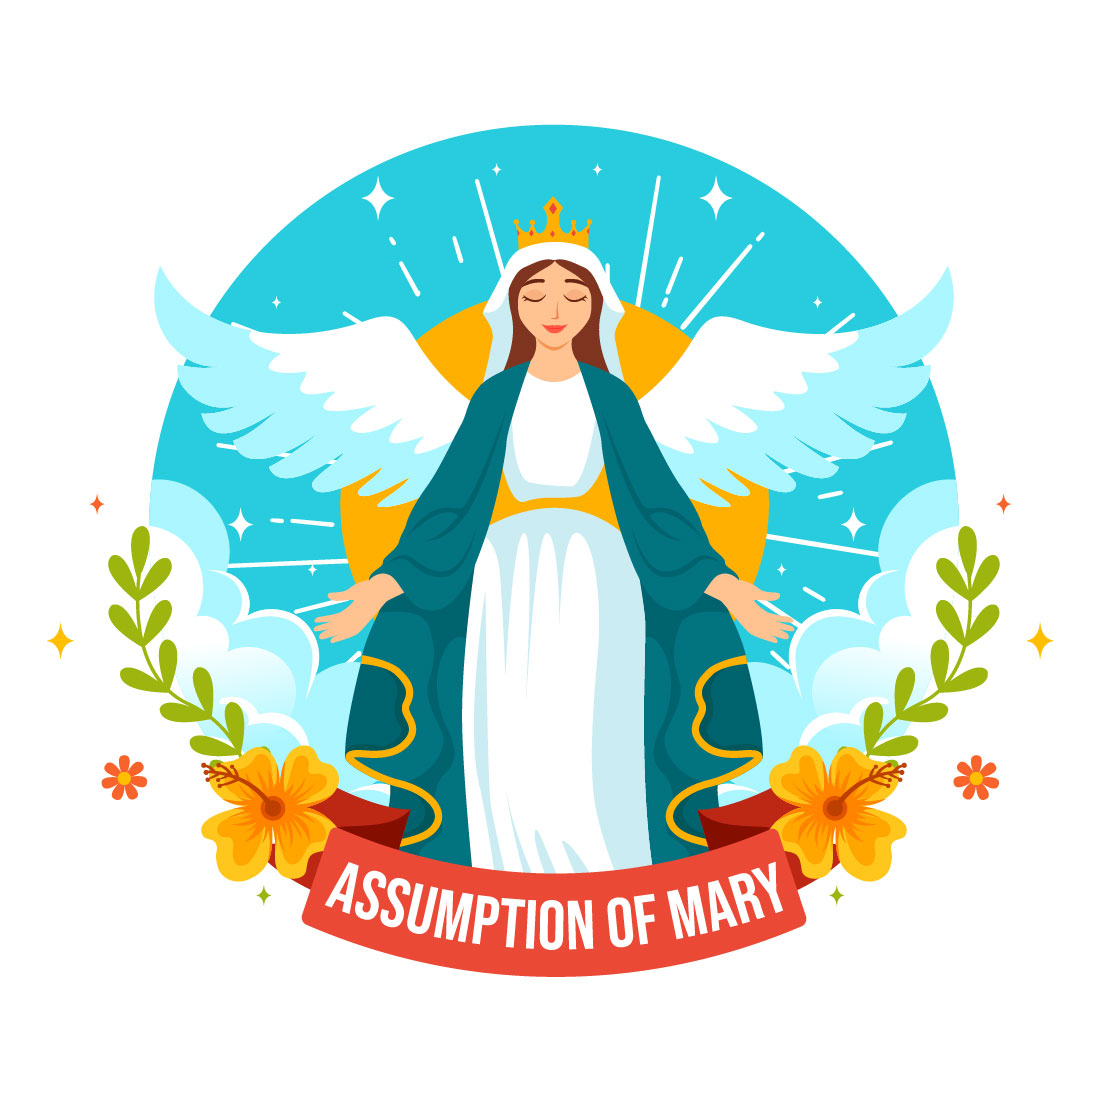 11 Assumption of Mary Illustration preview image.